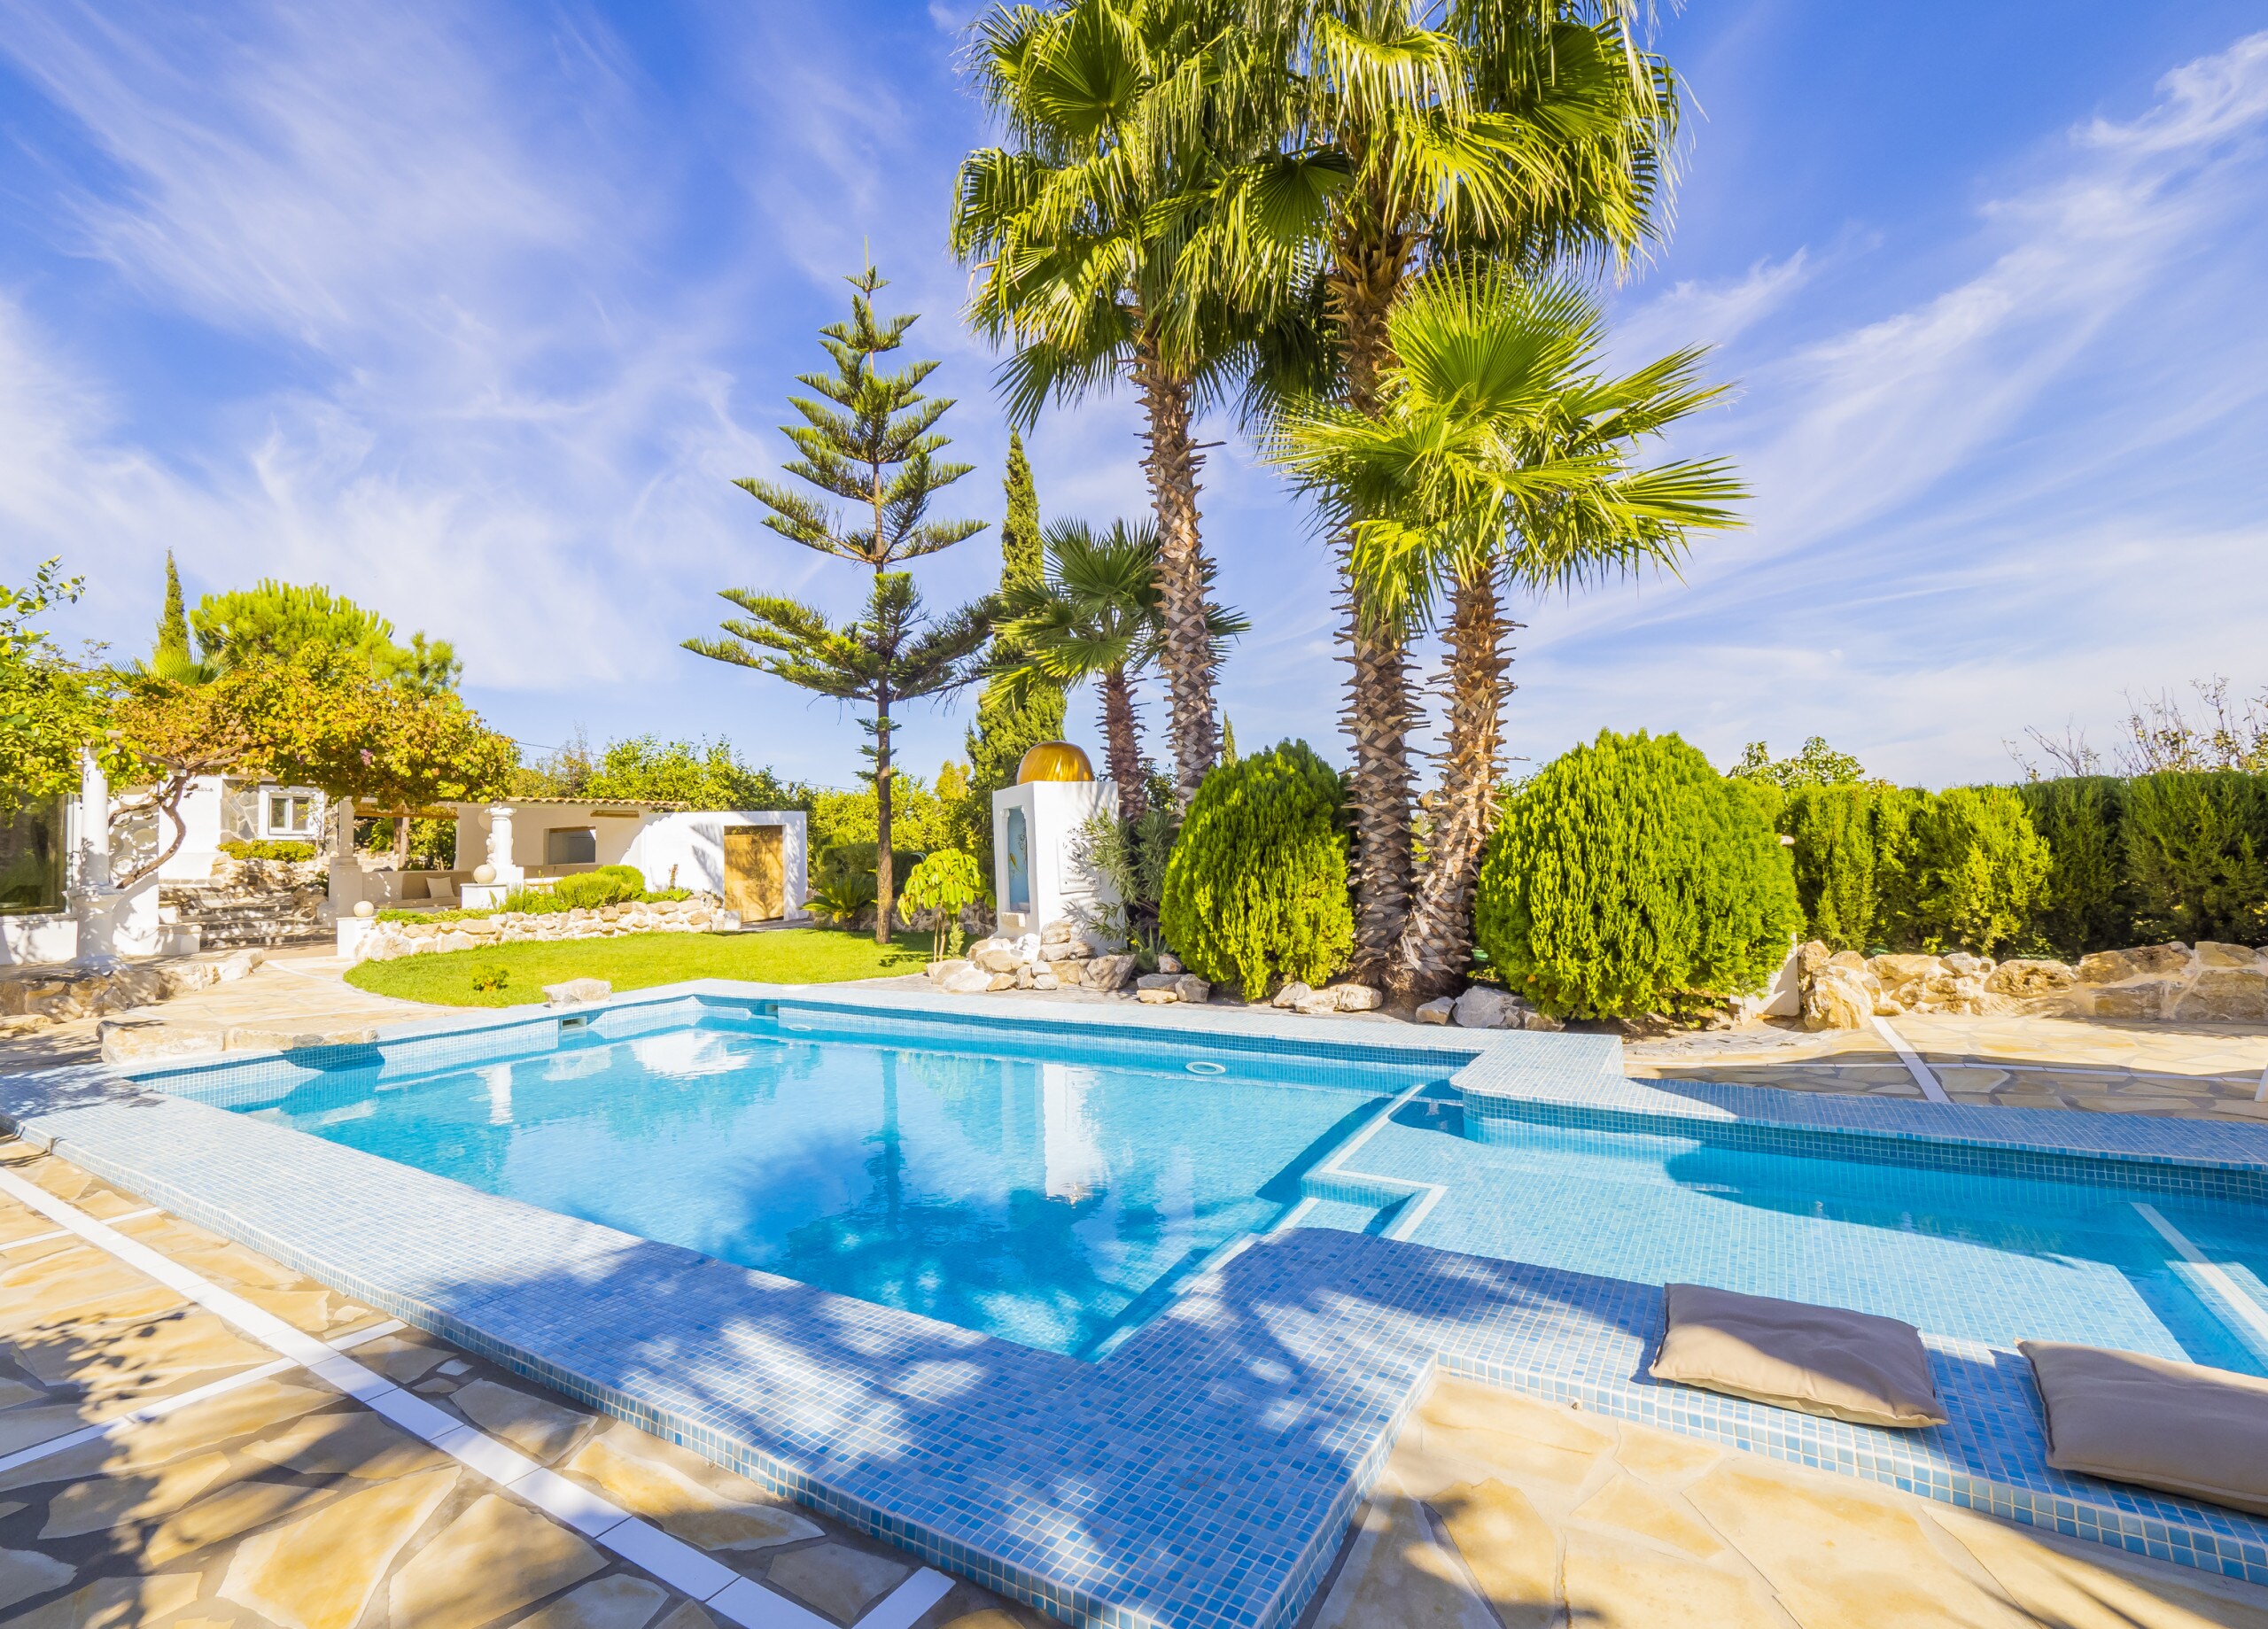 Enjoy the private pool of this house in Alhaurín el Grande